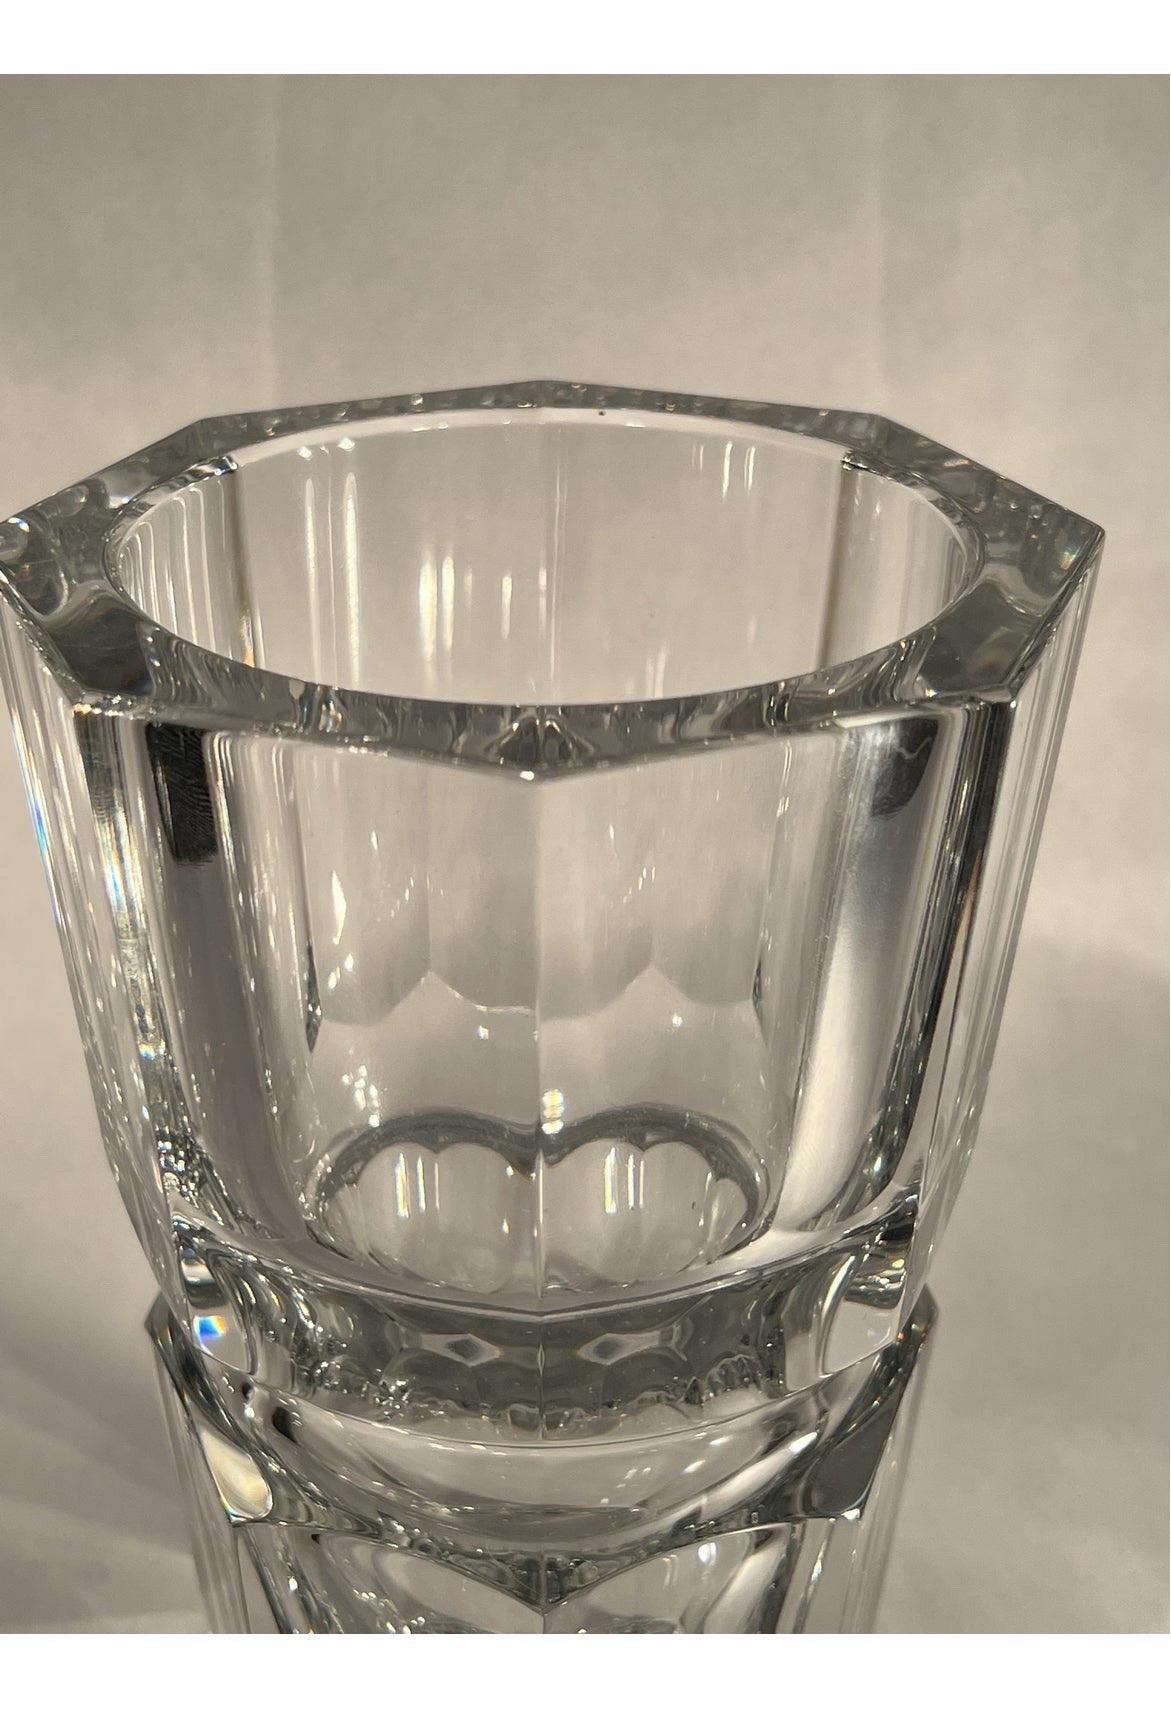 Baccarat French Crystal EDITH multi sided / Faceted heavy vase, 7.25” H.


No damage, minor scratching to bottom

Measures: 4.625” W x 7.25” H.